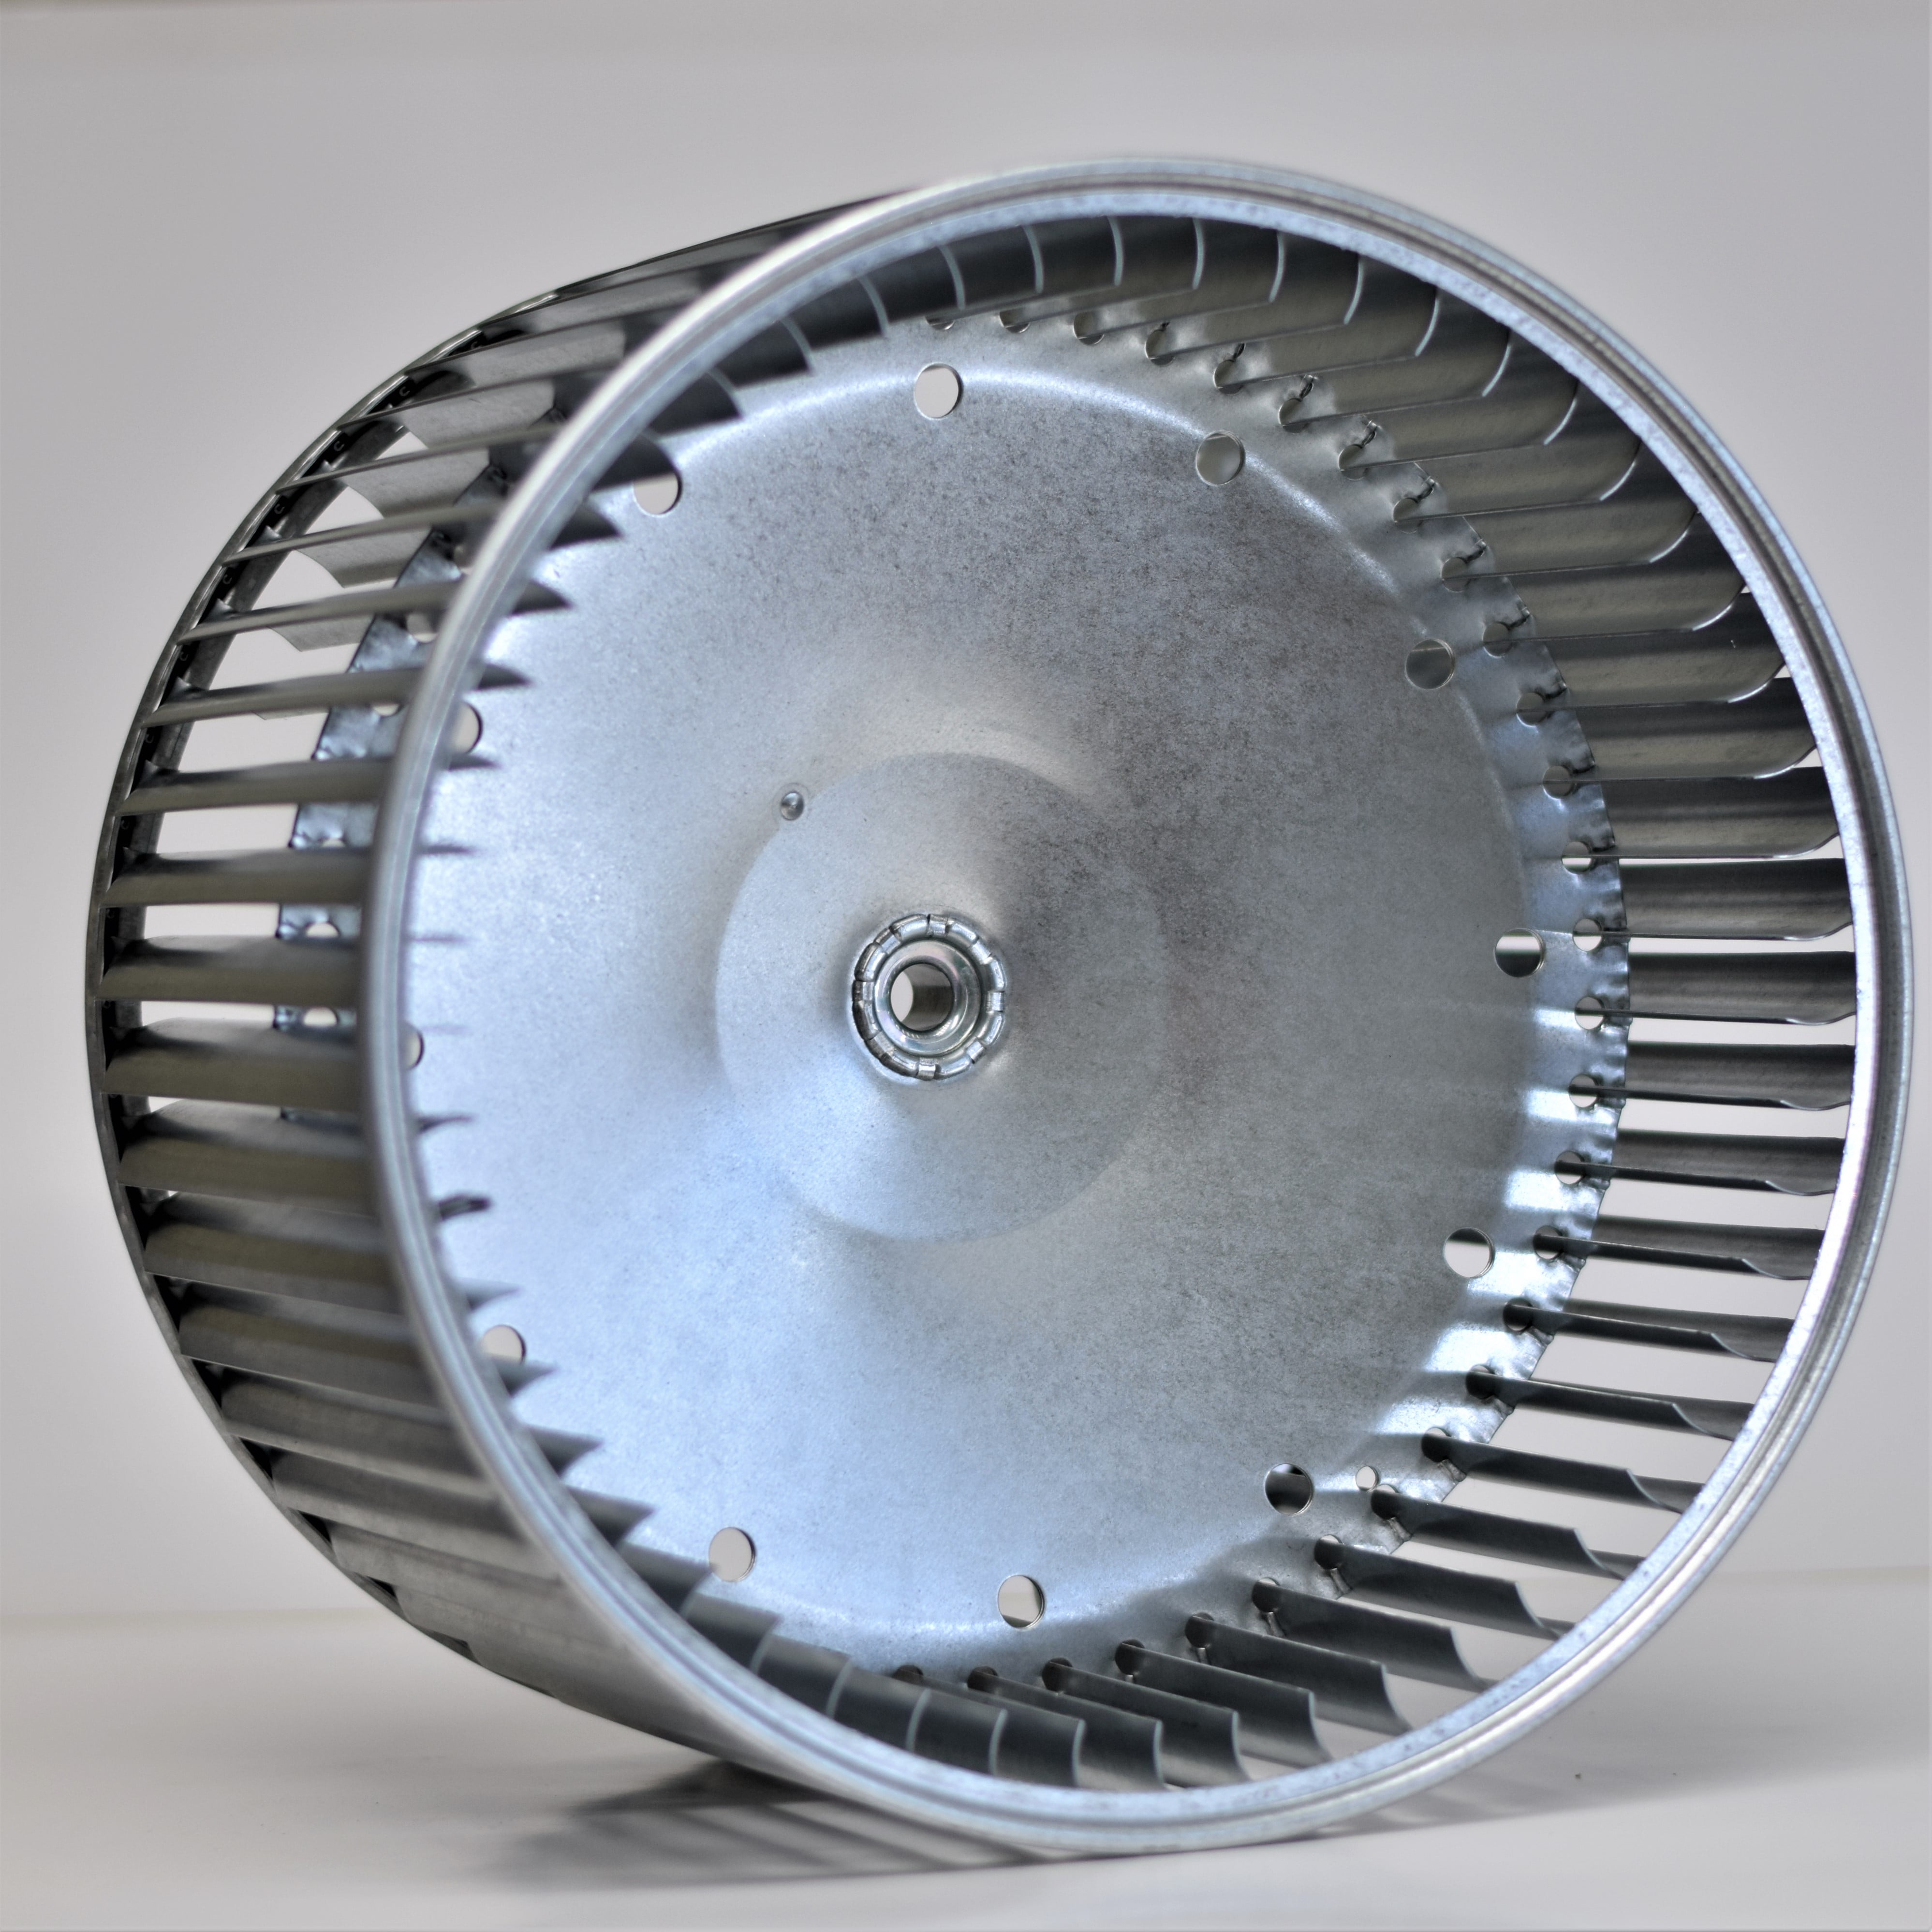 Details about   Fasco 1-6041 Squirrel Cage Blower Wheel 3-13/16" x 1-7/8" x 1/4" Bore CW 5000 